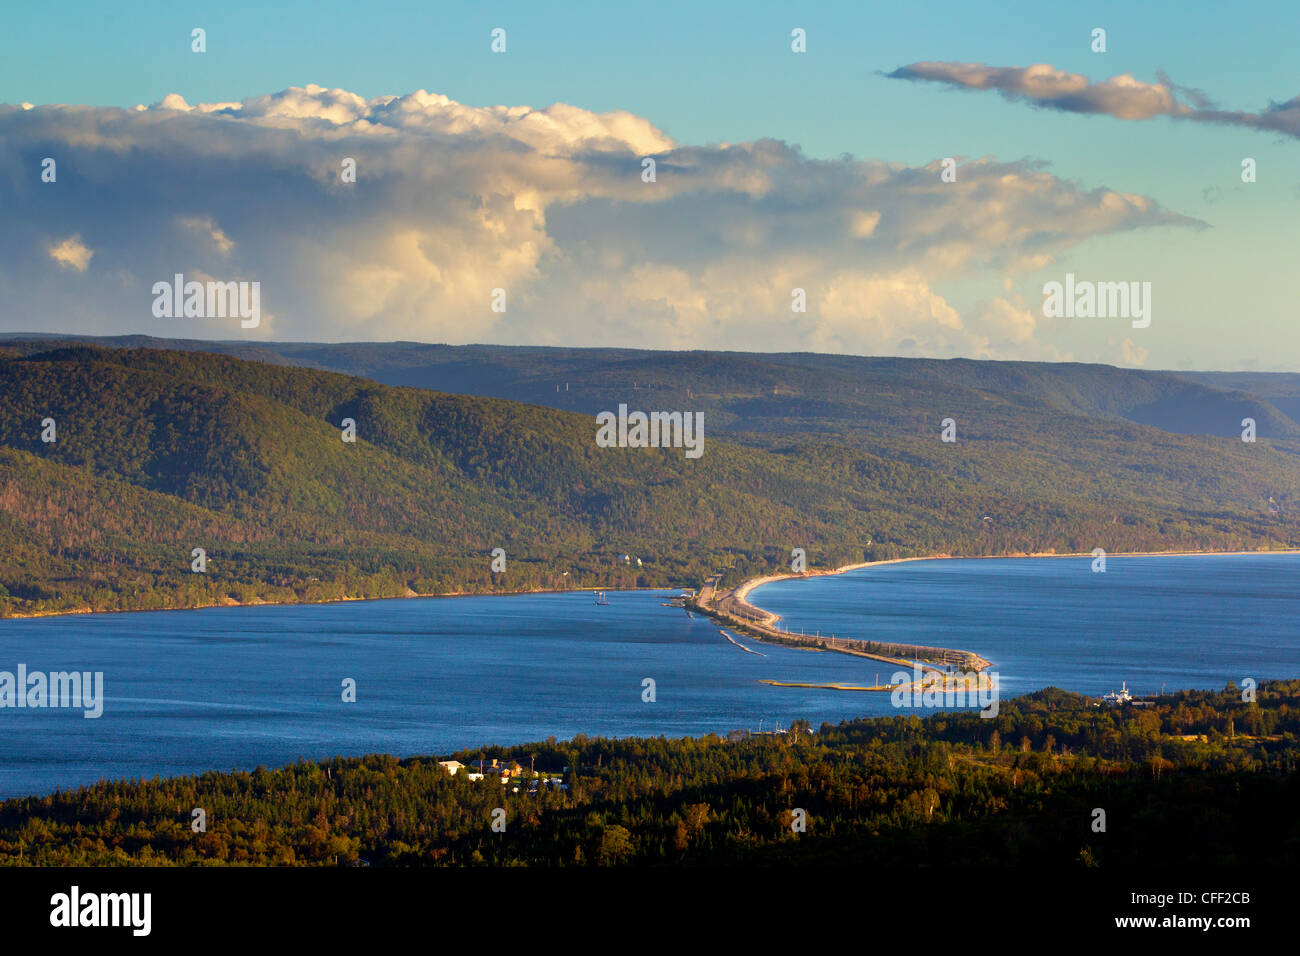 https://c8.alamy.com/comp/CFF2CB/view-from-st-anns-lookout-towards-ferry-bras-dor-lakes-cape-breton-CFF2CB.jpg